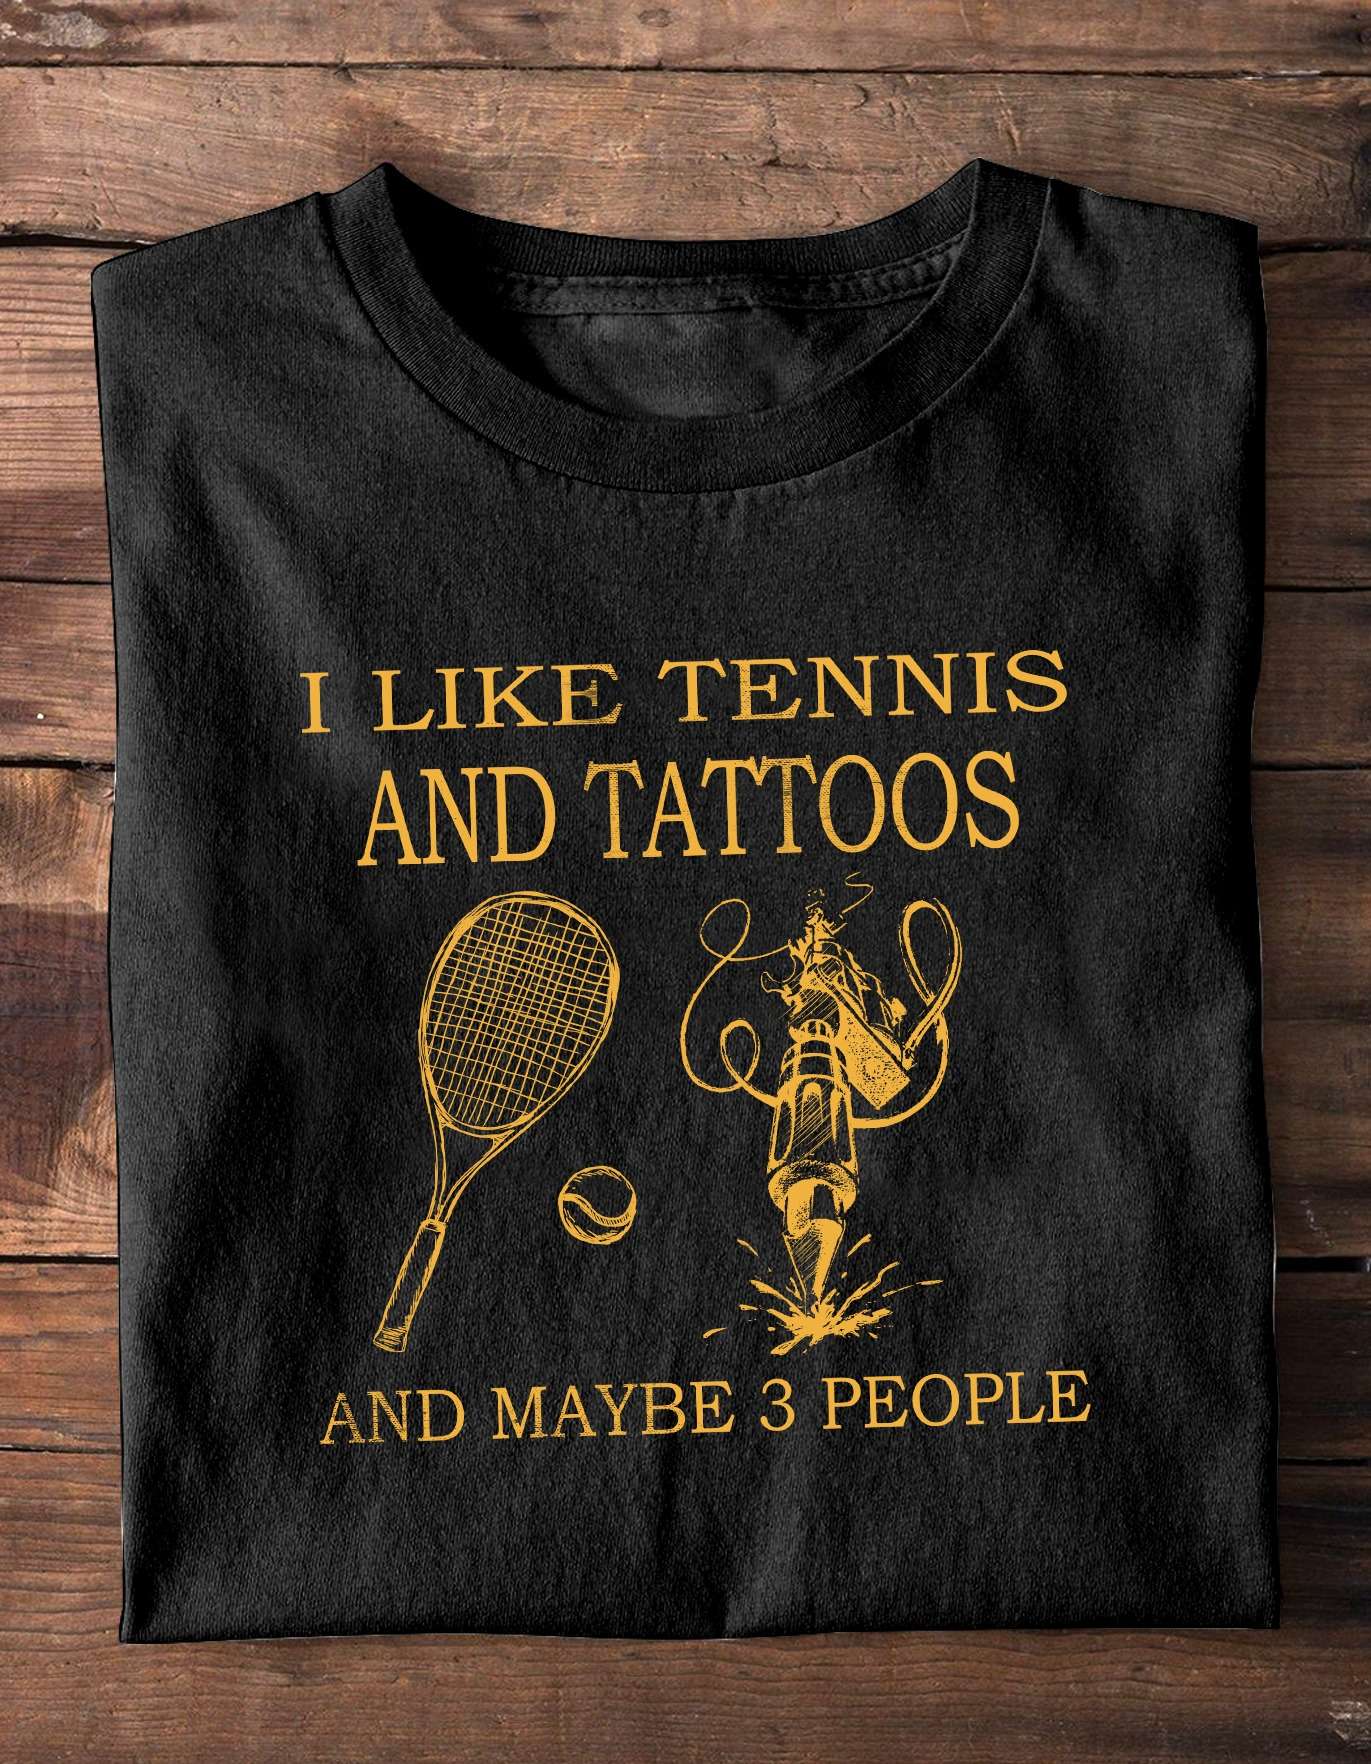 I like tennis and tattoos and maybe 3 people - Tattoo person